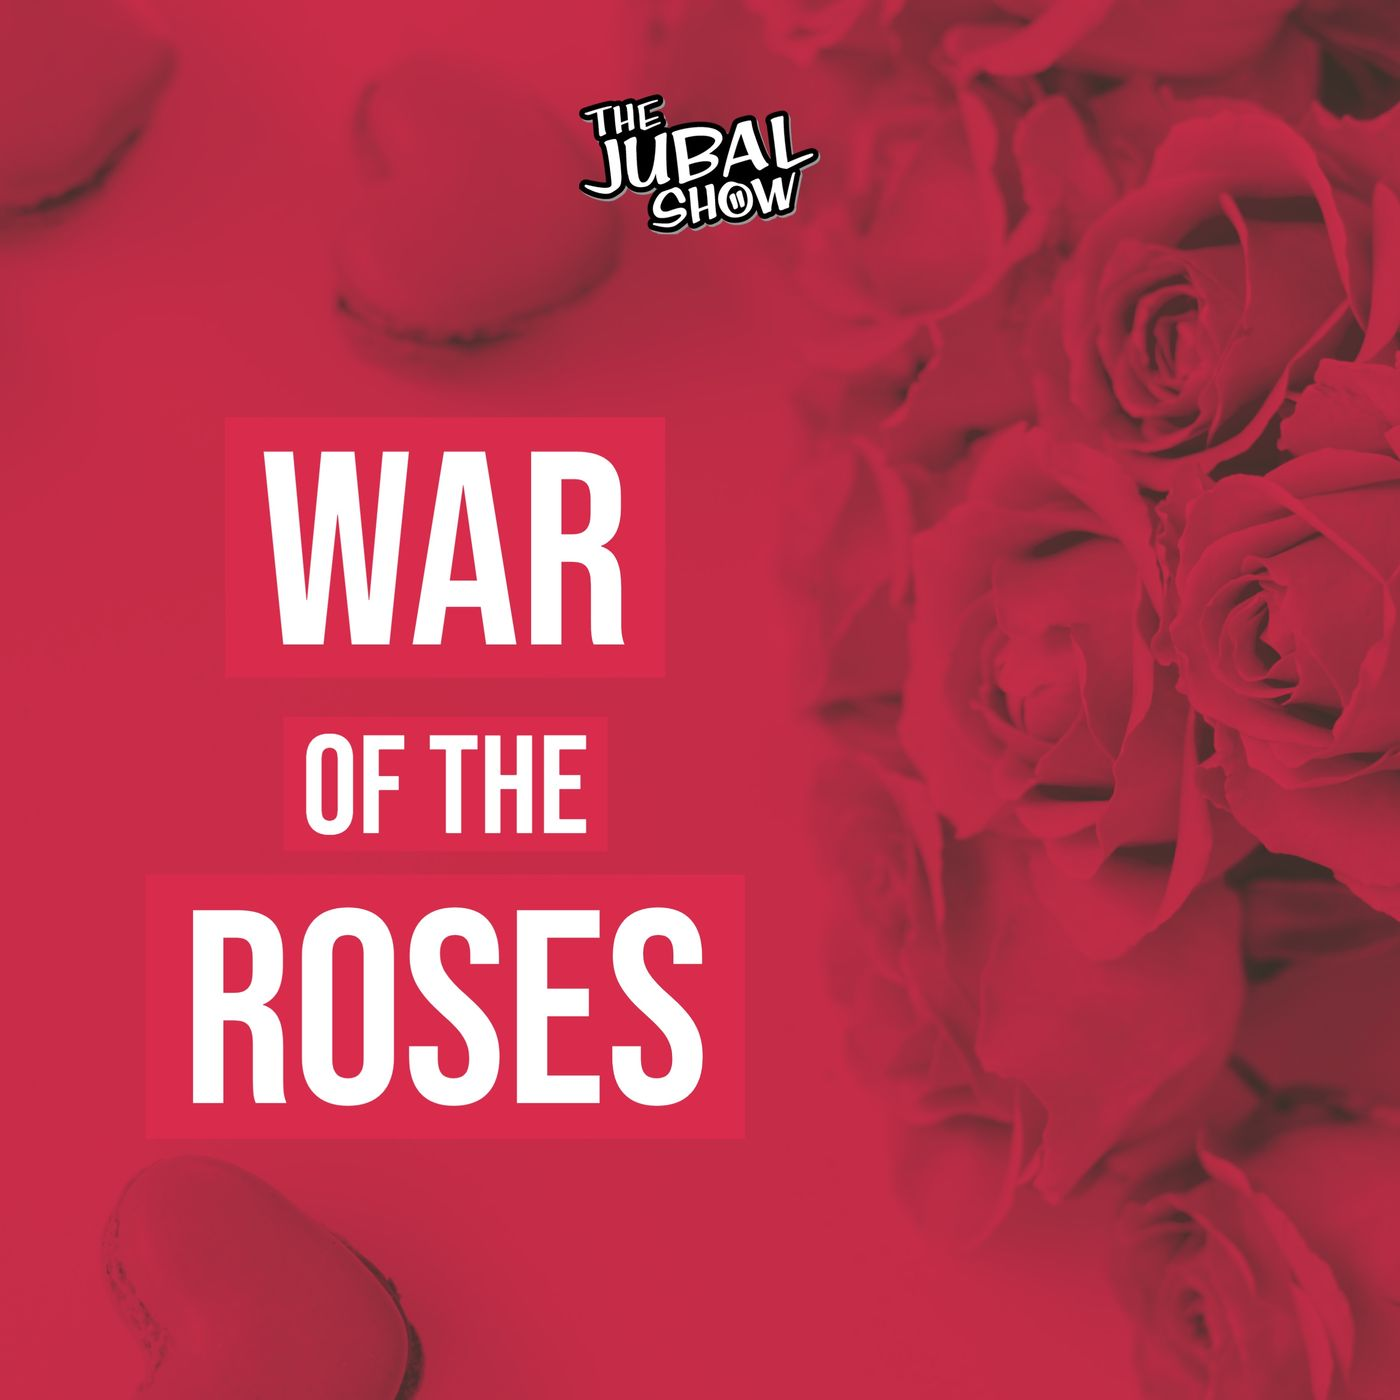 Jubal Fresh almost ruined this War of the Roses!